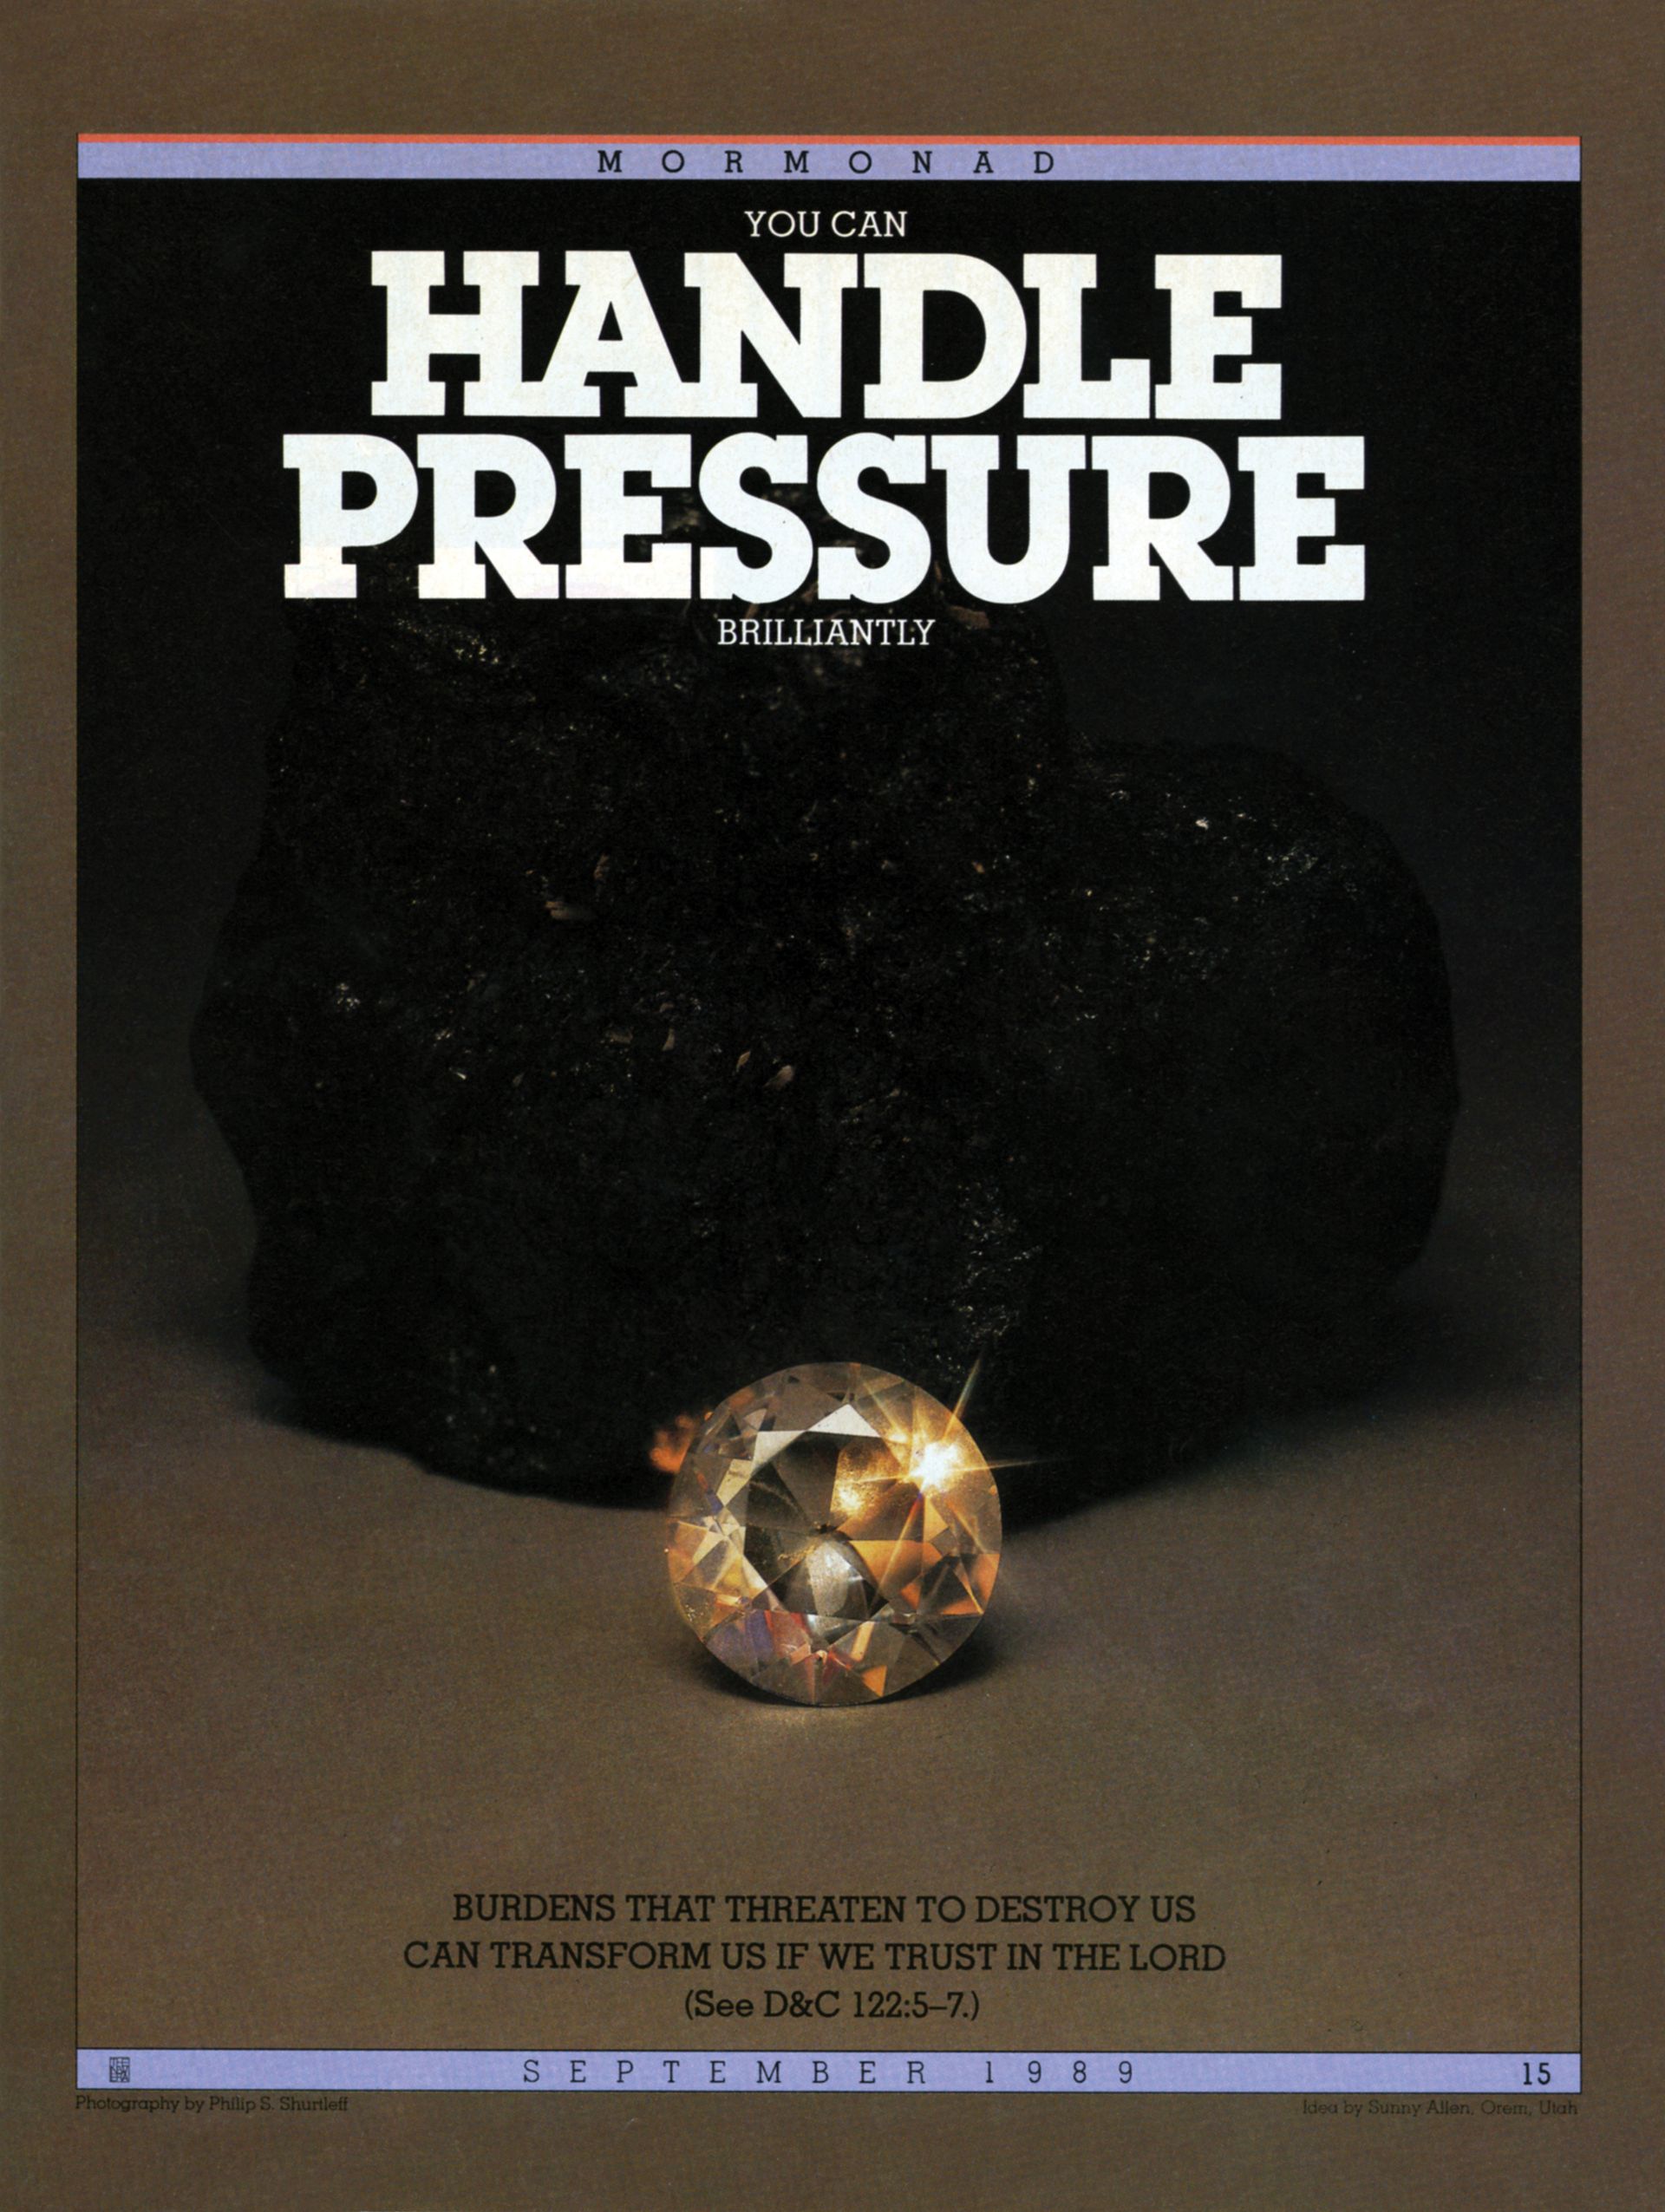 You Can Handle Pressure Brilliantly. Burdens that threaten to destroy us can transform us if we trust in the Lord. (See D&C 122:5–7.) Sept. 1989 © undefined ipCode 1.